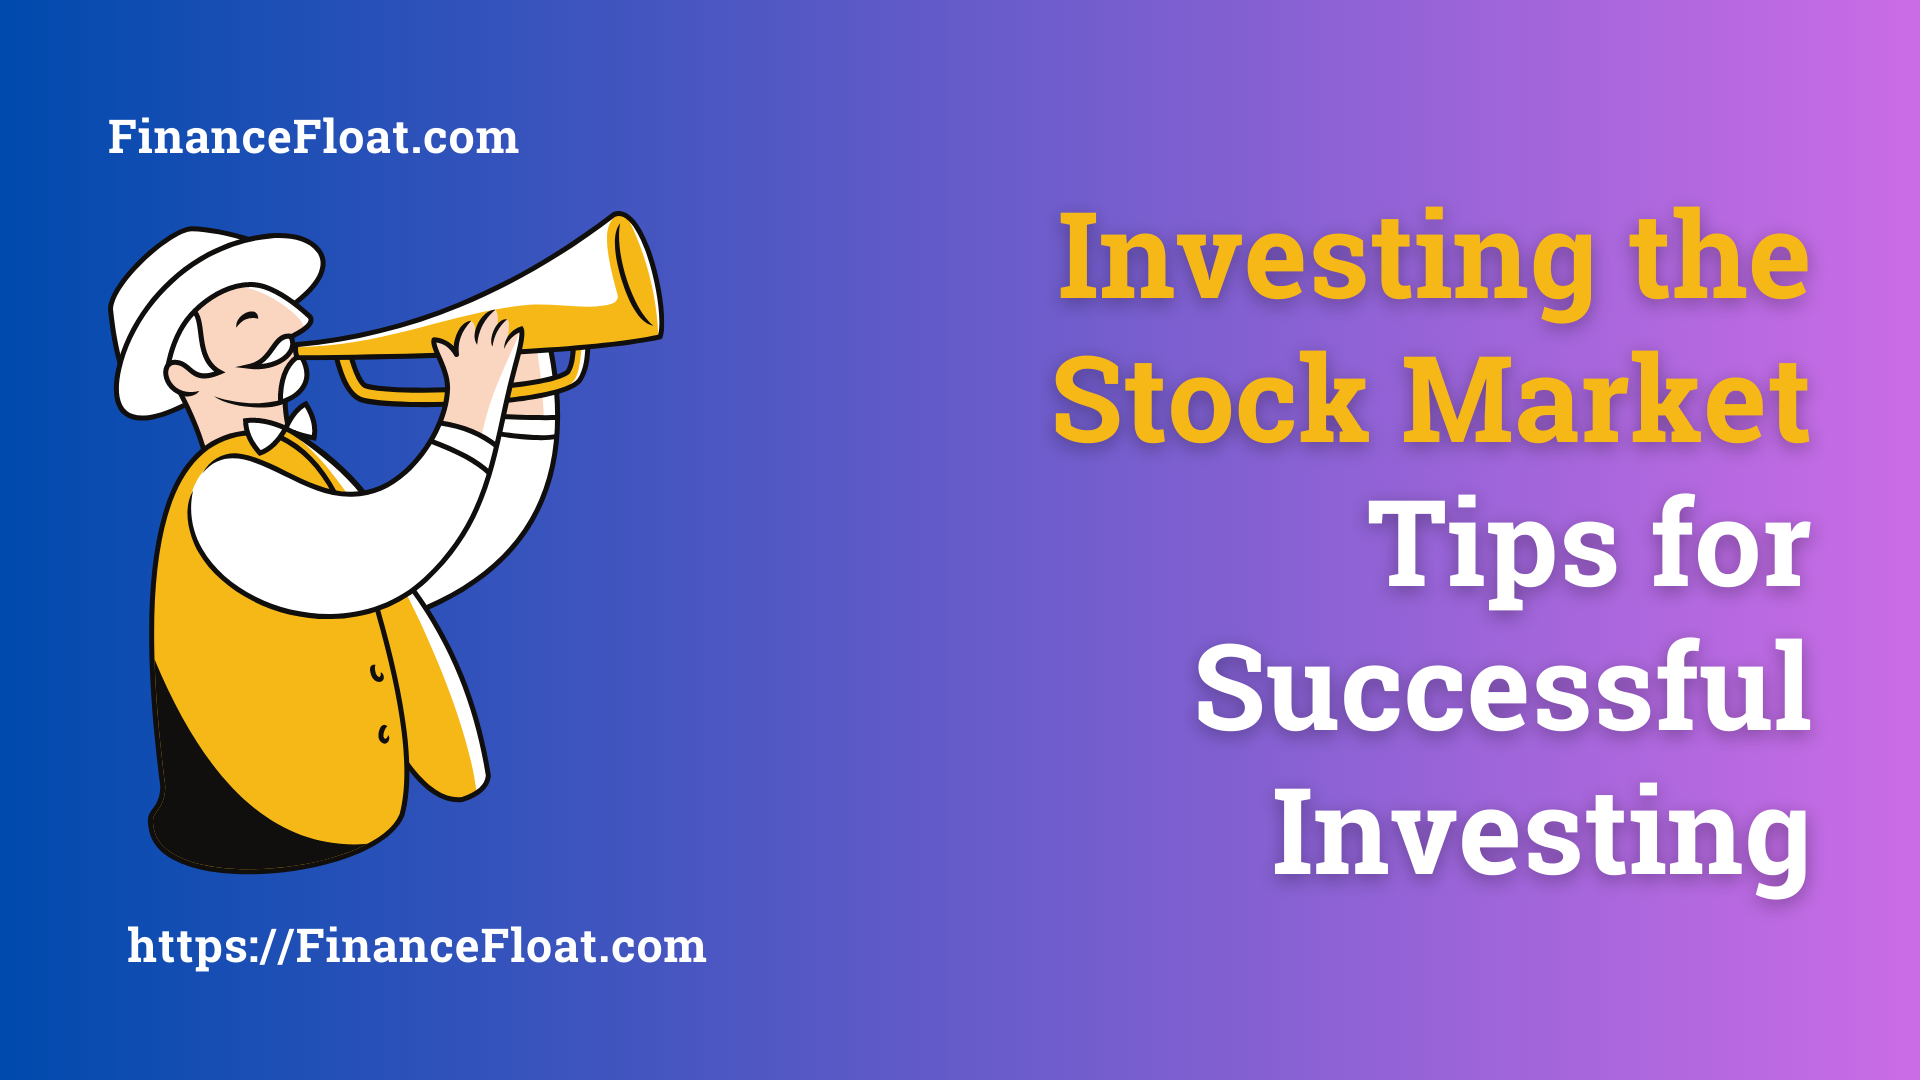 Investing the Stock Market Tips for Successful Investing